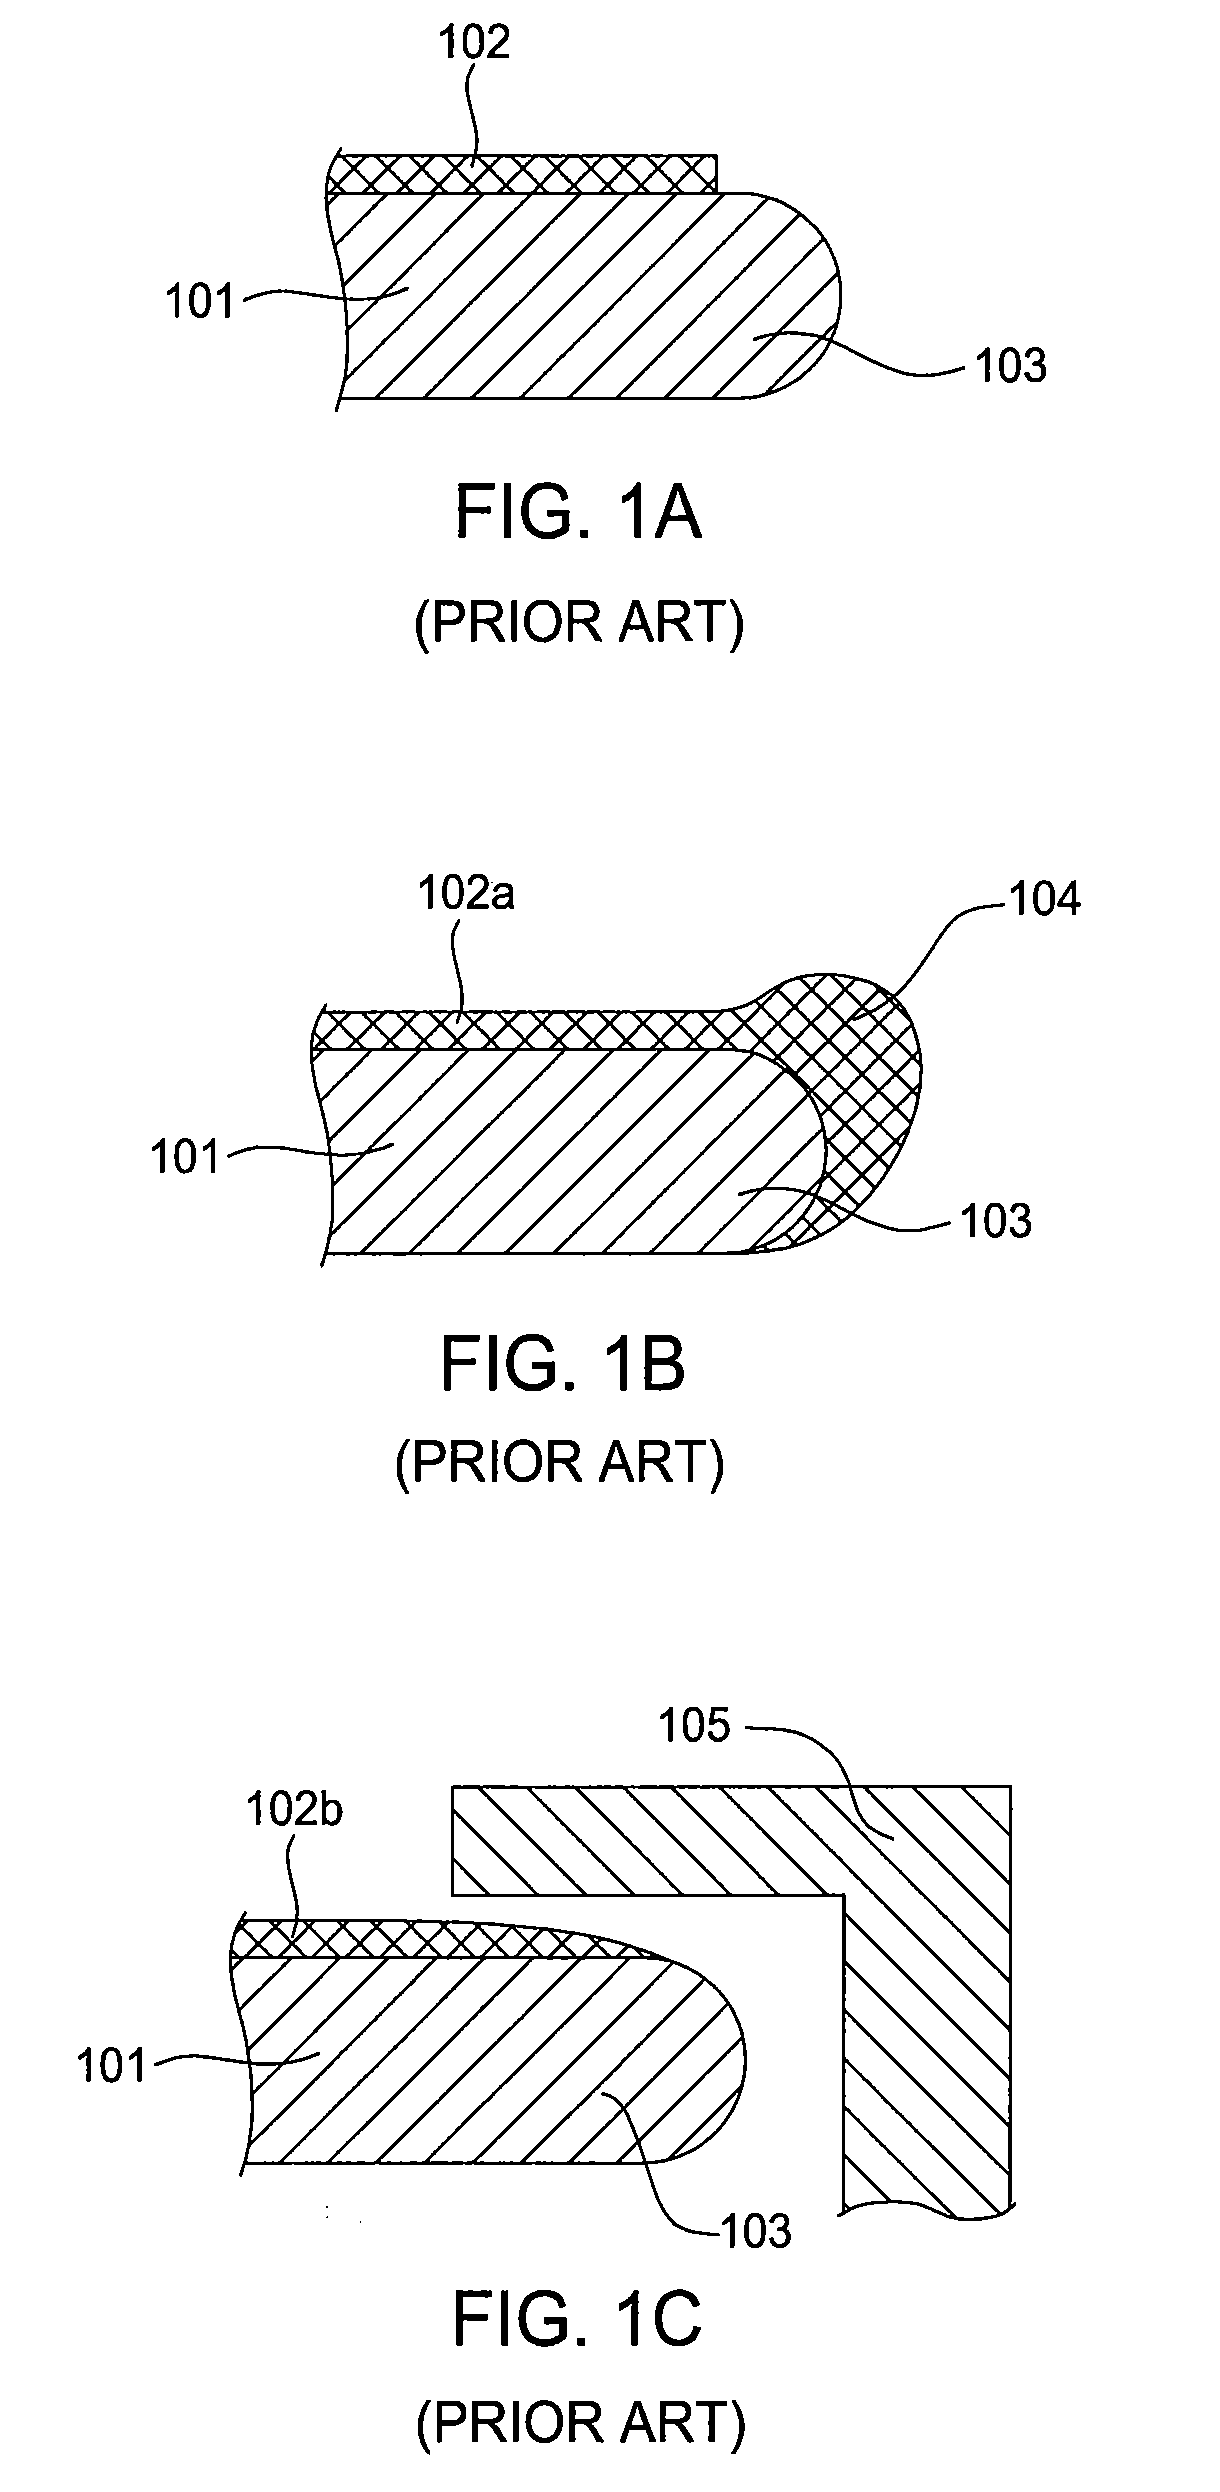 Systems for plasma enhanced chemical vapor deposition and bevel edge etching